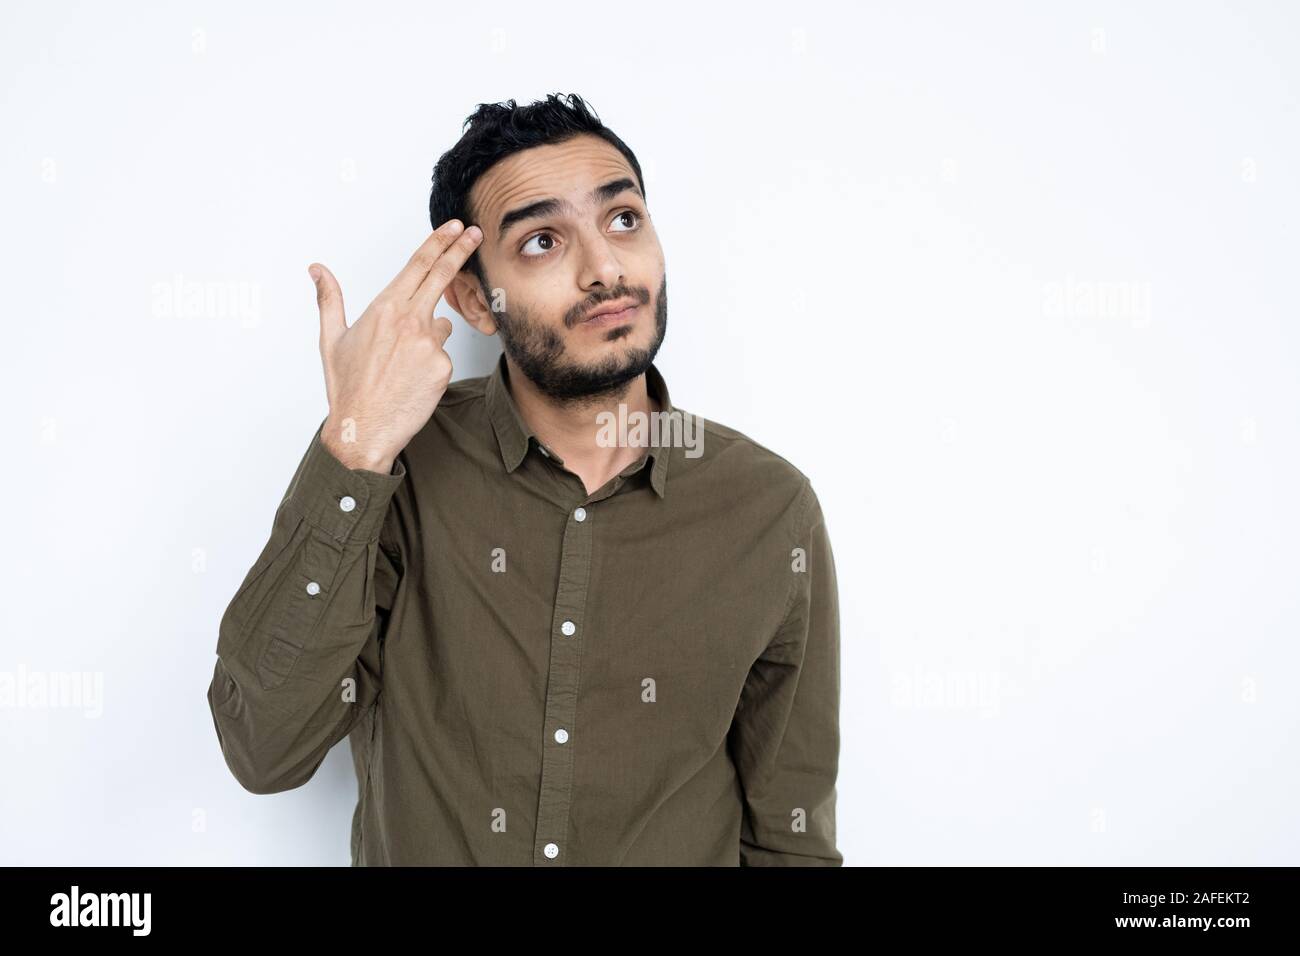 Perplexed young man in casualwear holding two fingers by his head Stock Photo